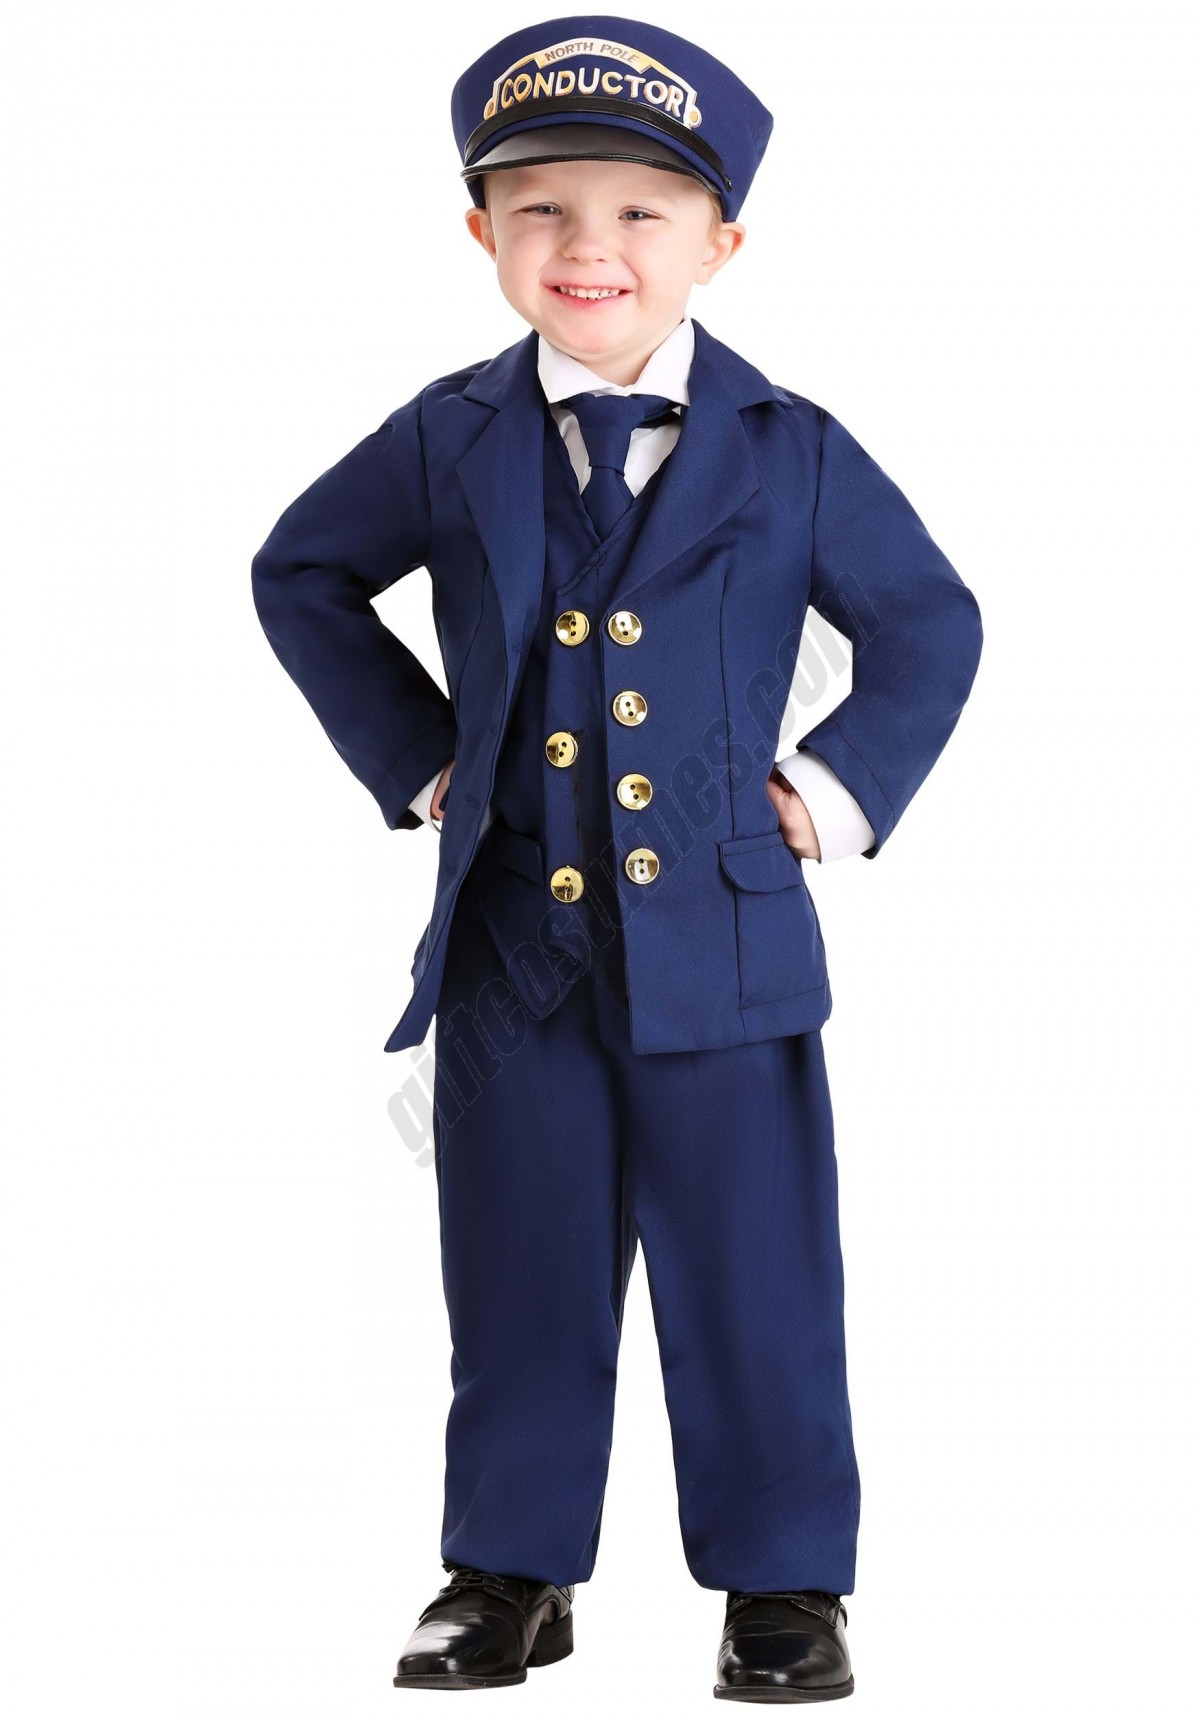 North Pole Train Conductor Toddler Costume Promotions - -0